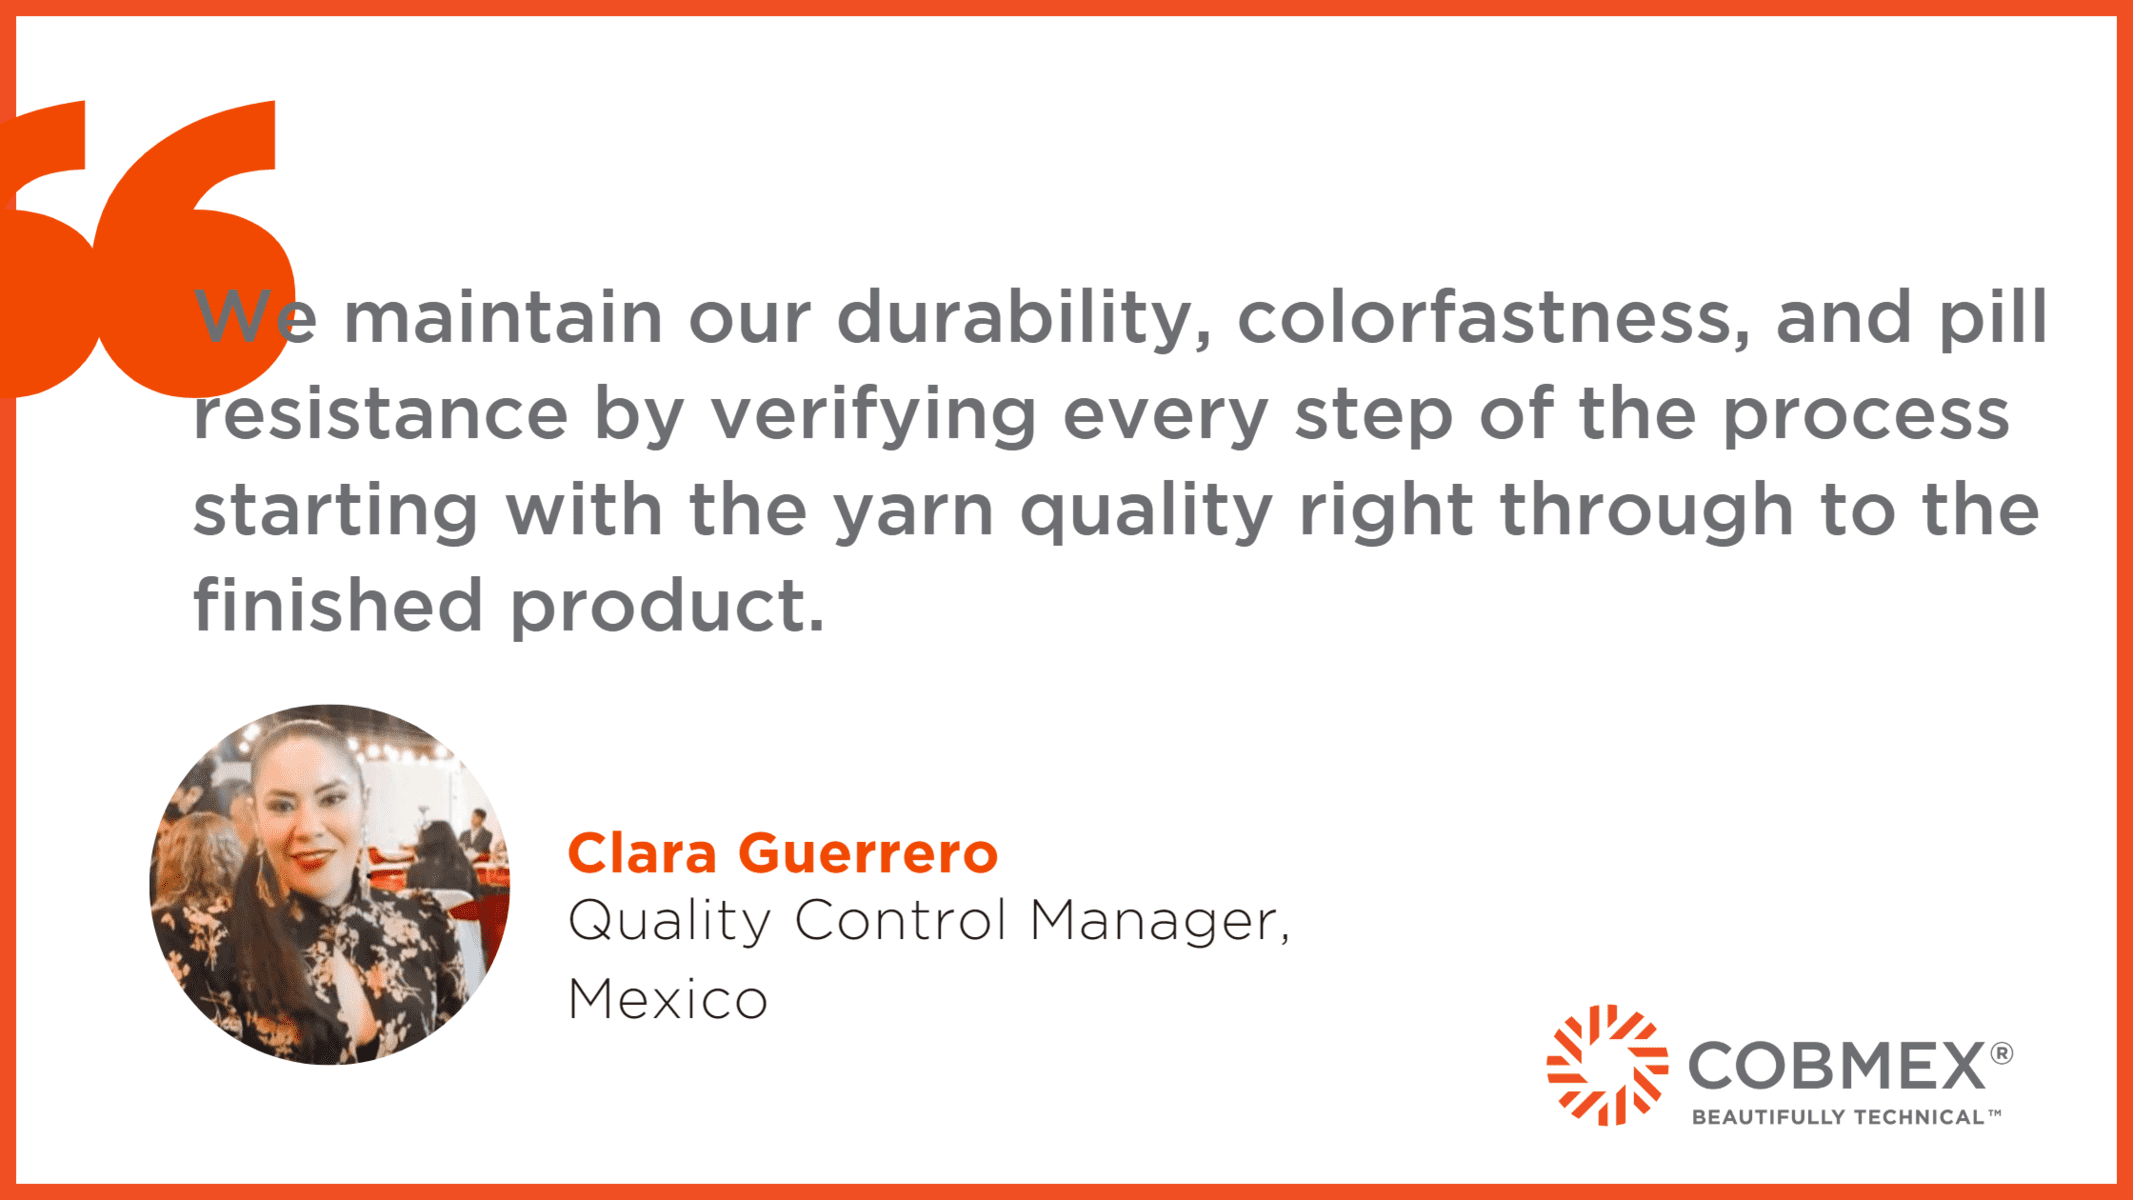 We maintain our durability, colorfastness, and pill resistance by verifying every step of the process starting with the yarn quality right through to the finished product.